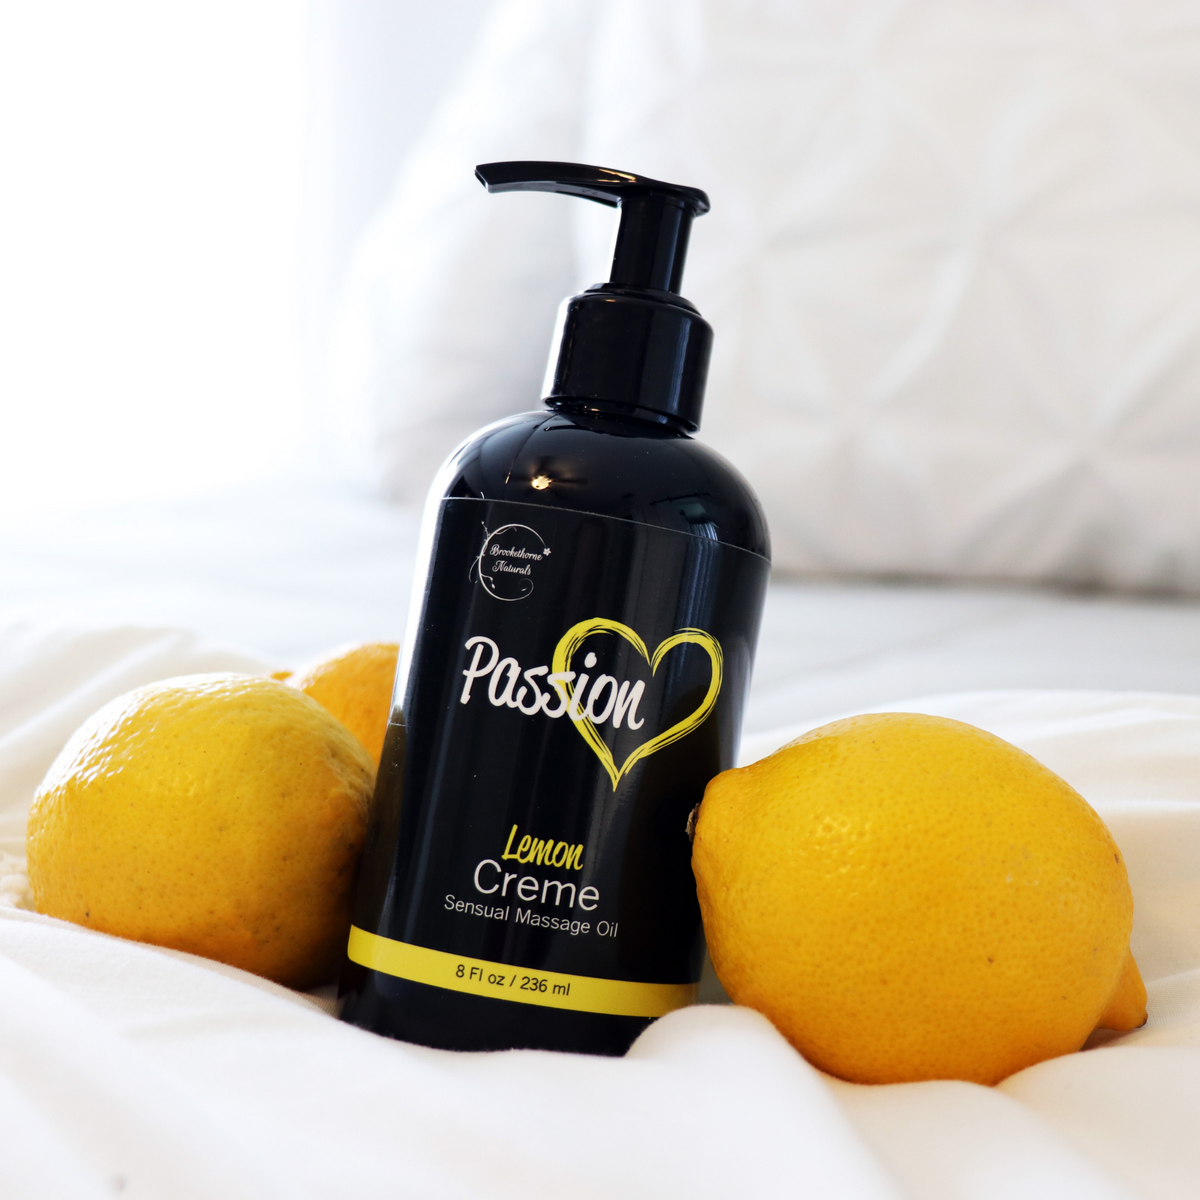 Picture of Passion Lemon Creme bottle on a bed next to lemons